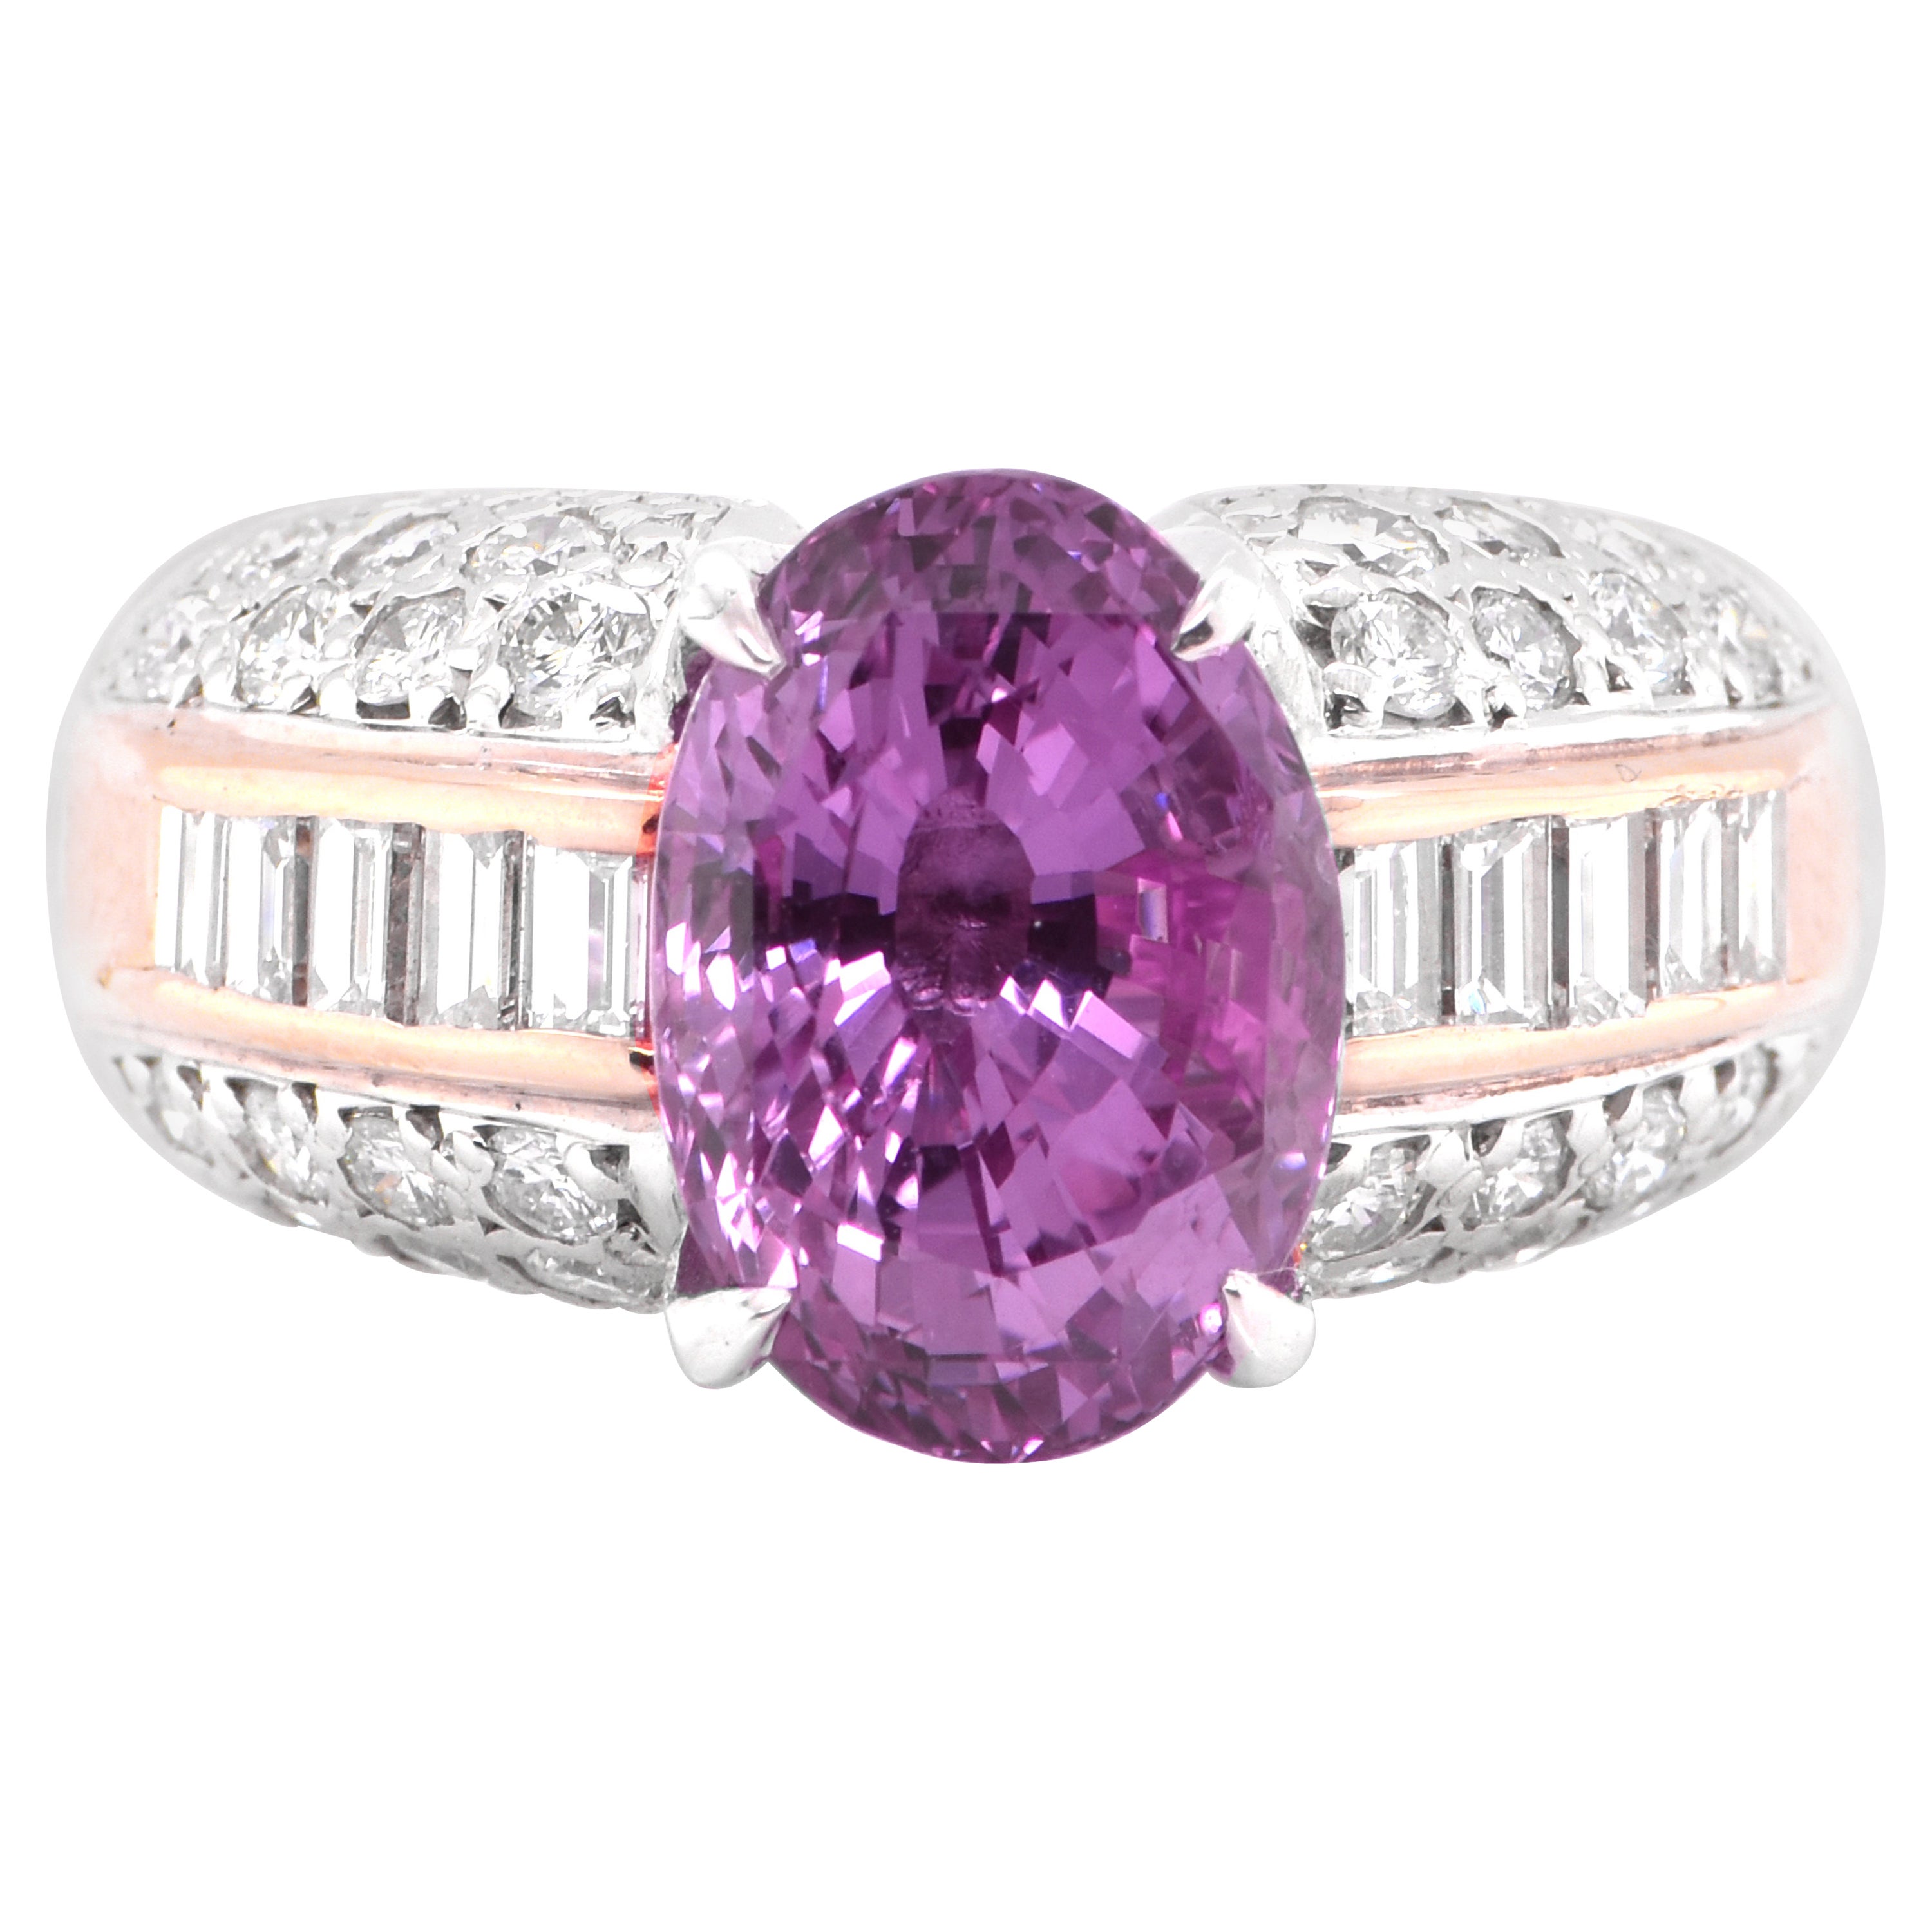 GIA Certified 5.06 Carat Natural Pink Sapphire Ring Set in Platinum and 18K Gold